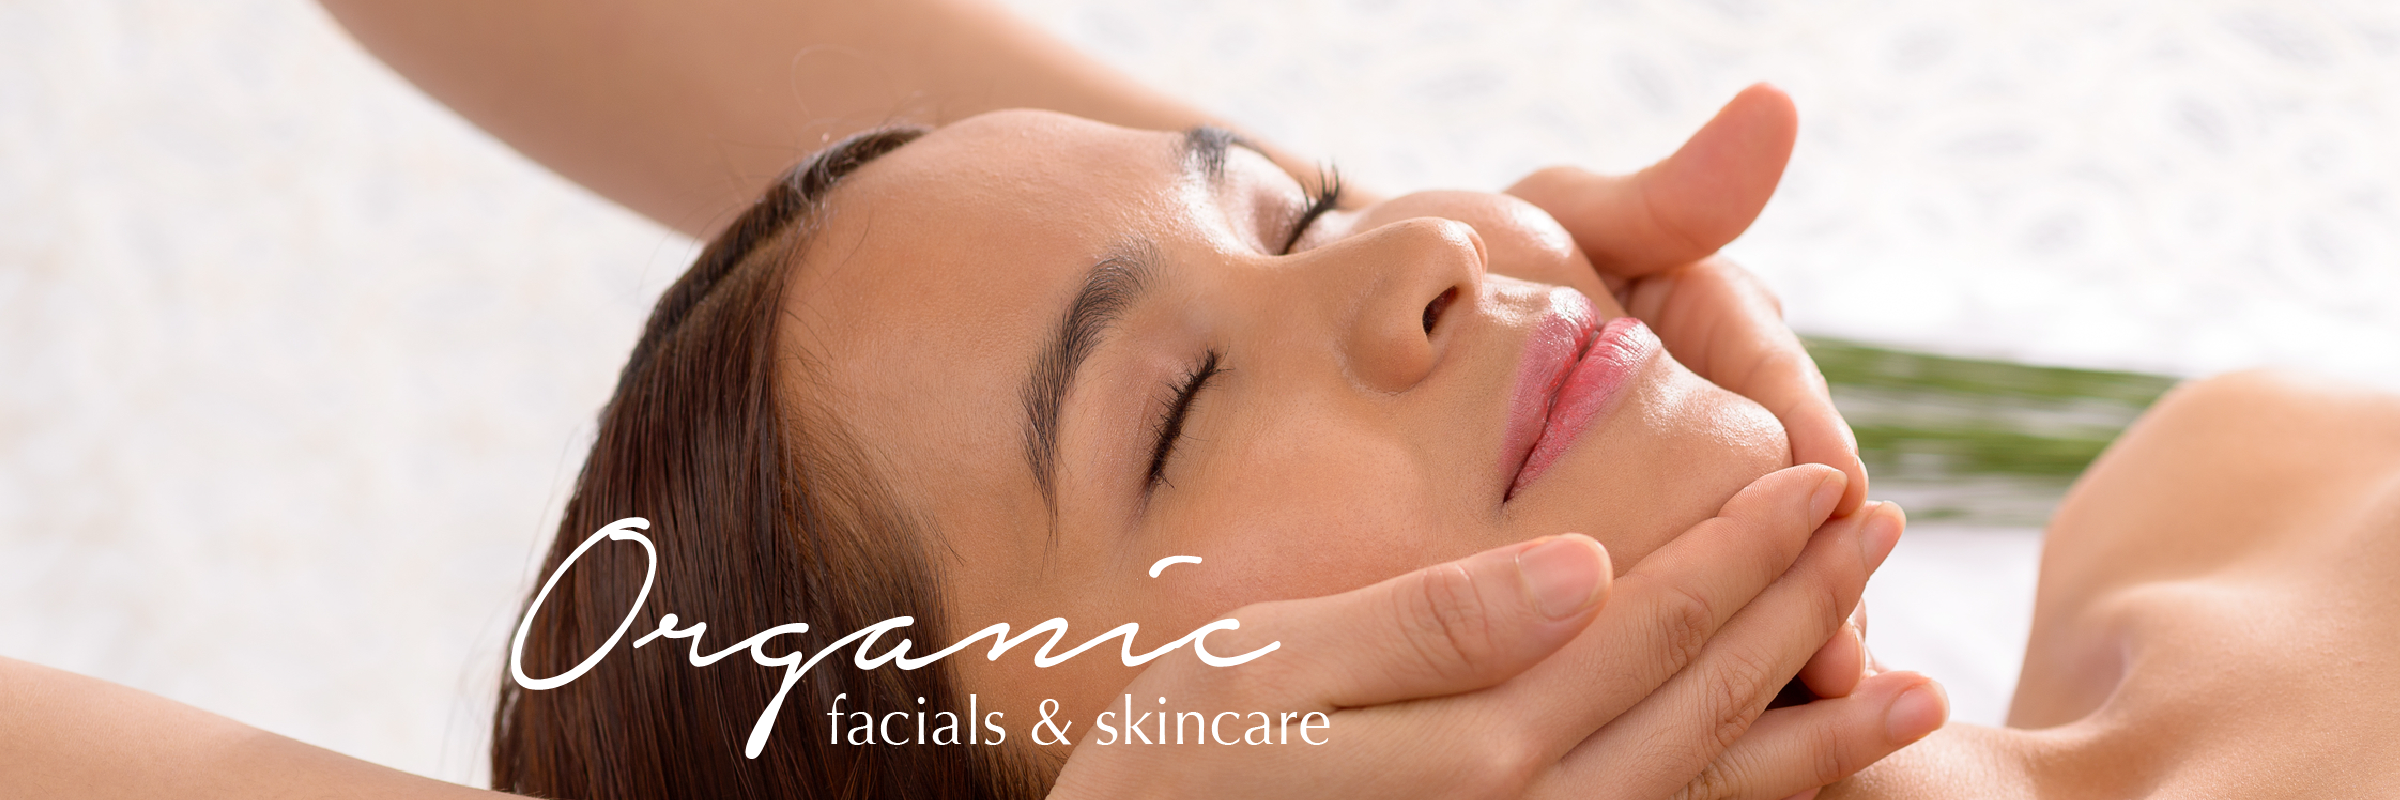 Organic Facial at Vitality Spa in Old Lyme CT